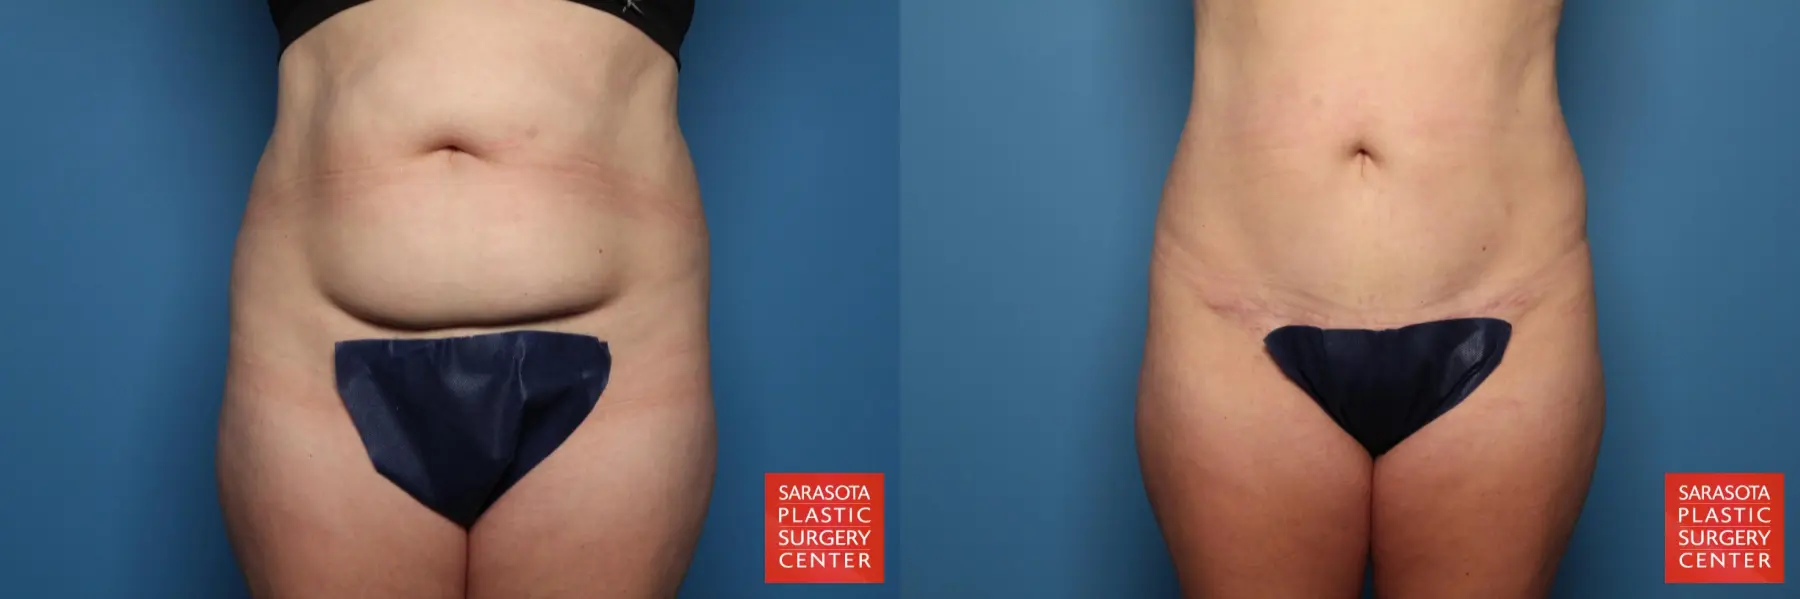 Mini Tummy Tuck: Patient 3 - Before and After  